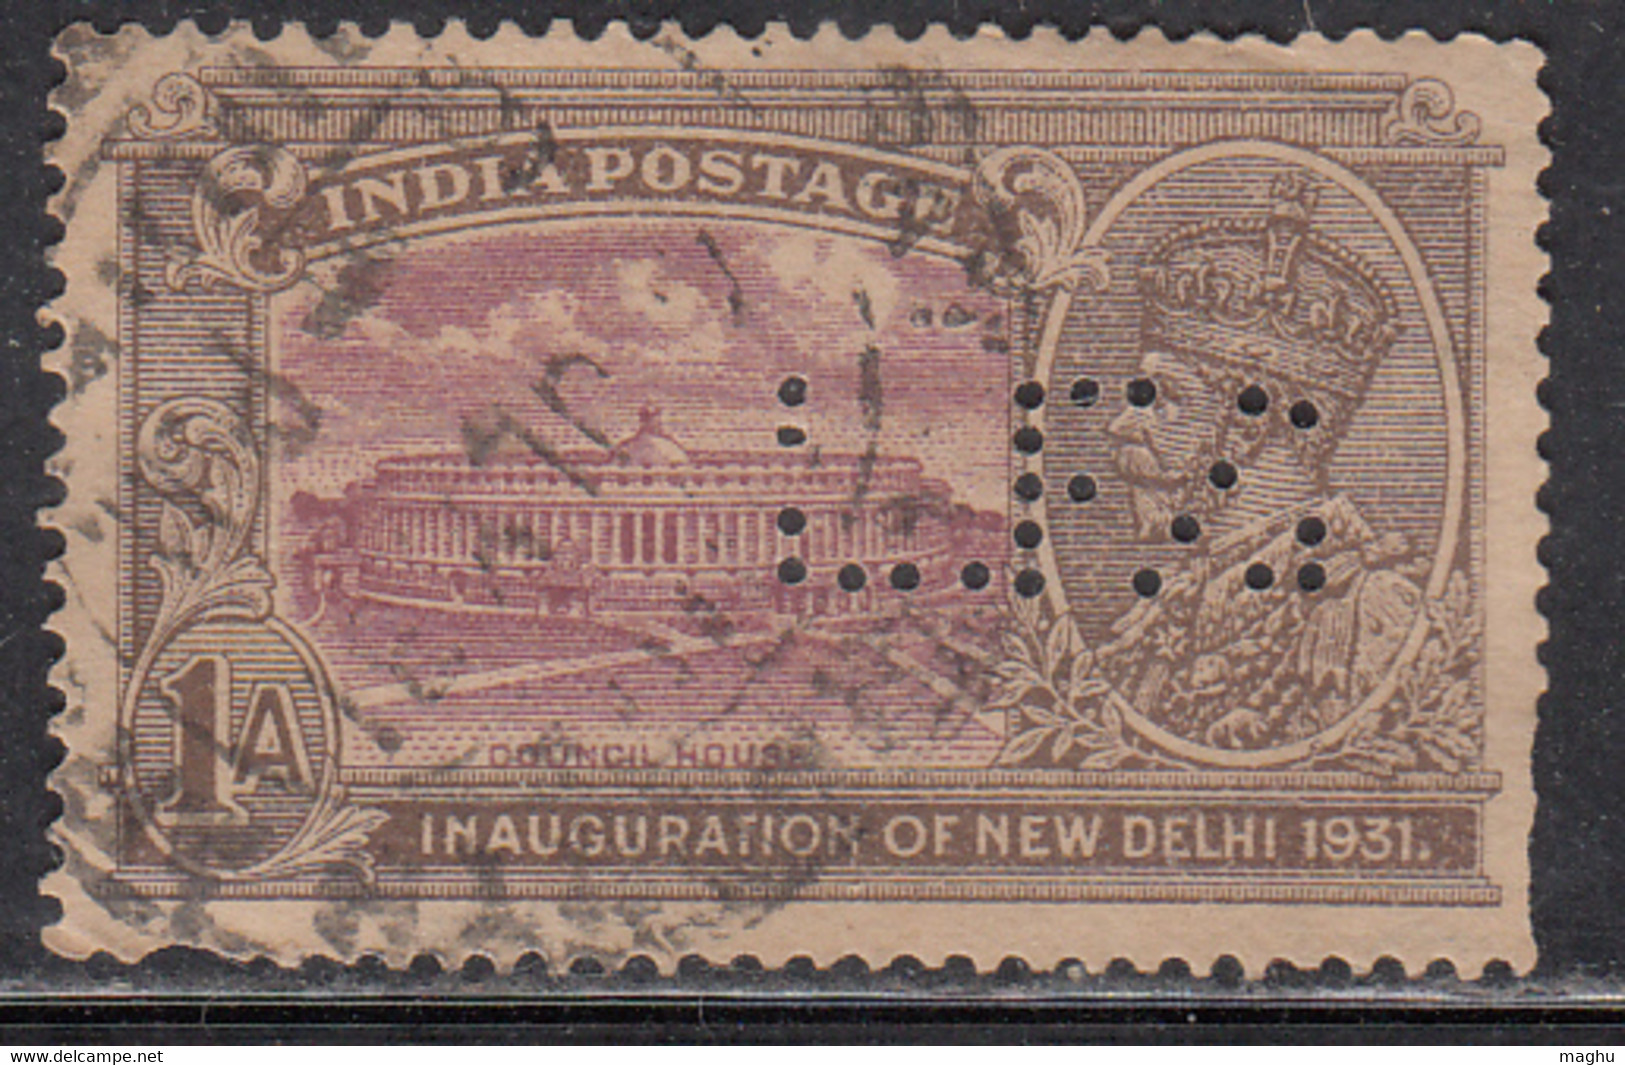 Perfin / Perfins  On 1a British India Used 1931 Inauguration - Perfin